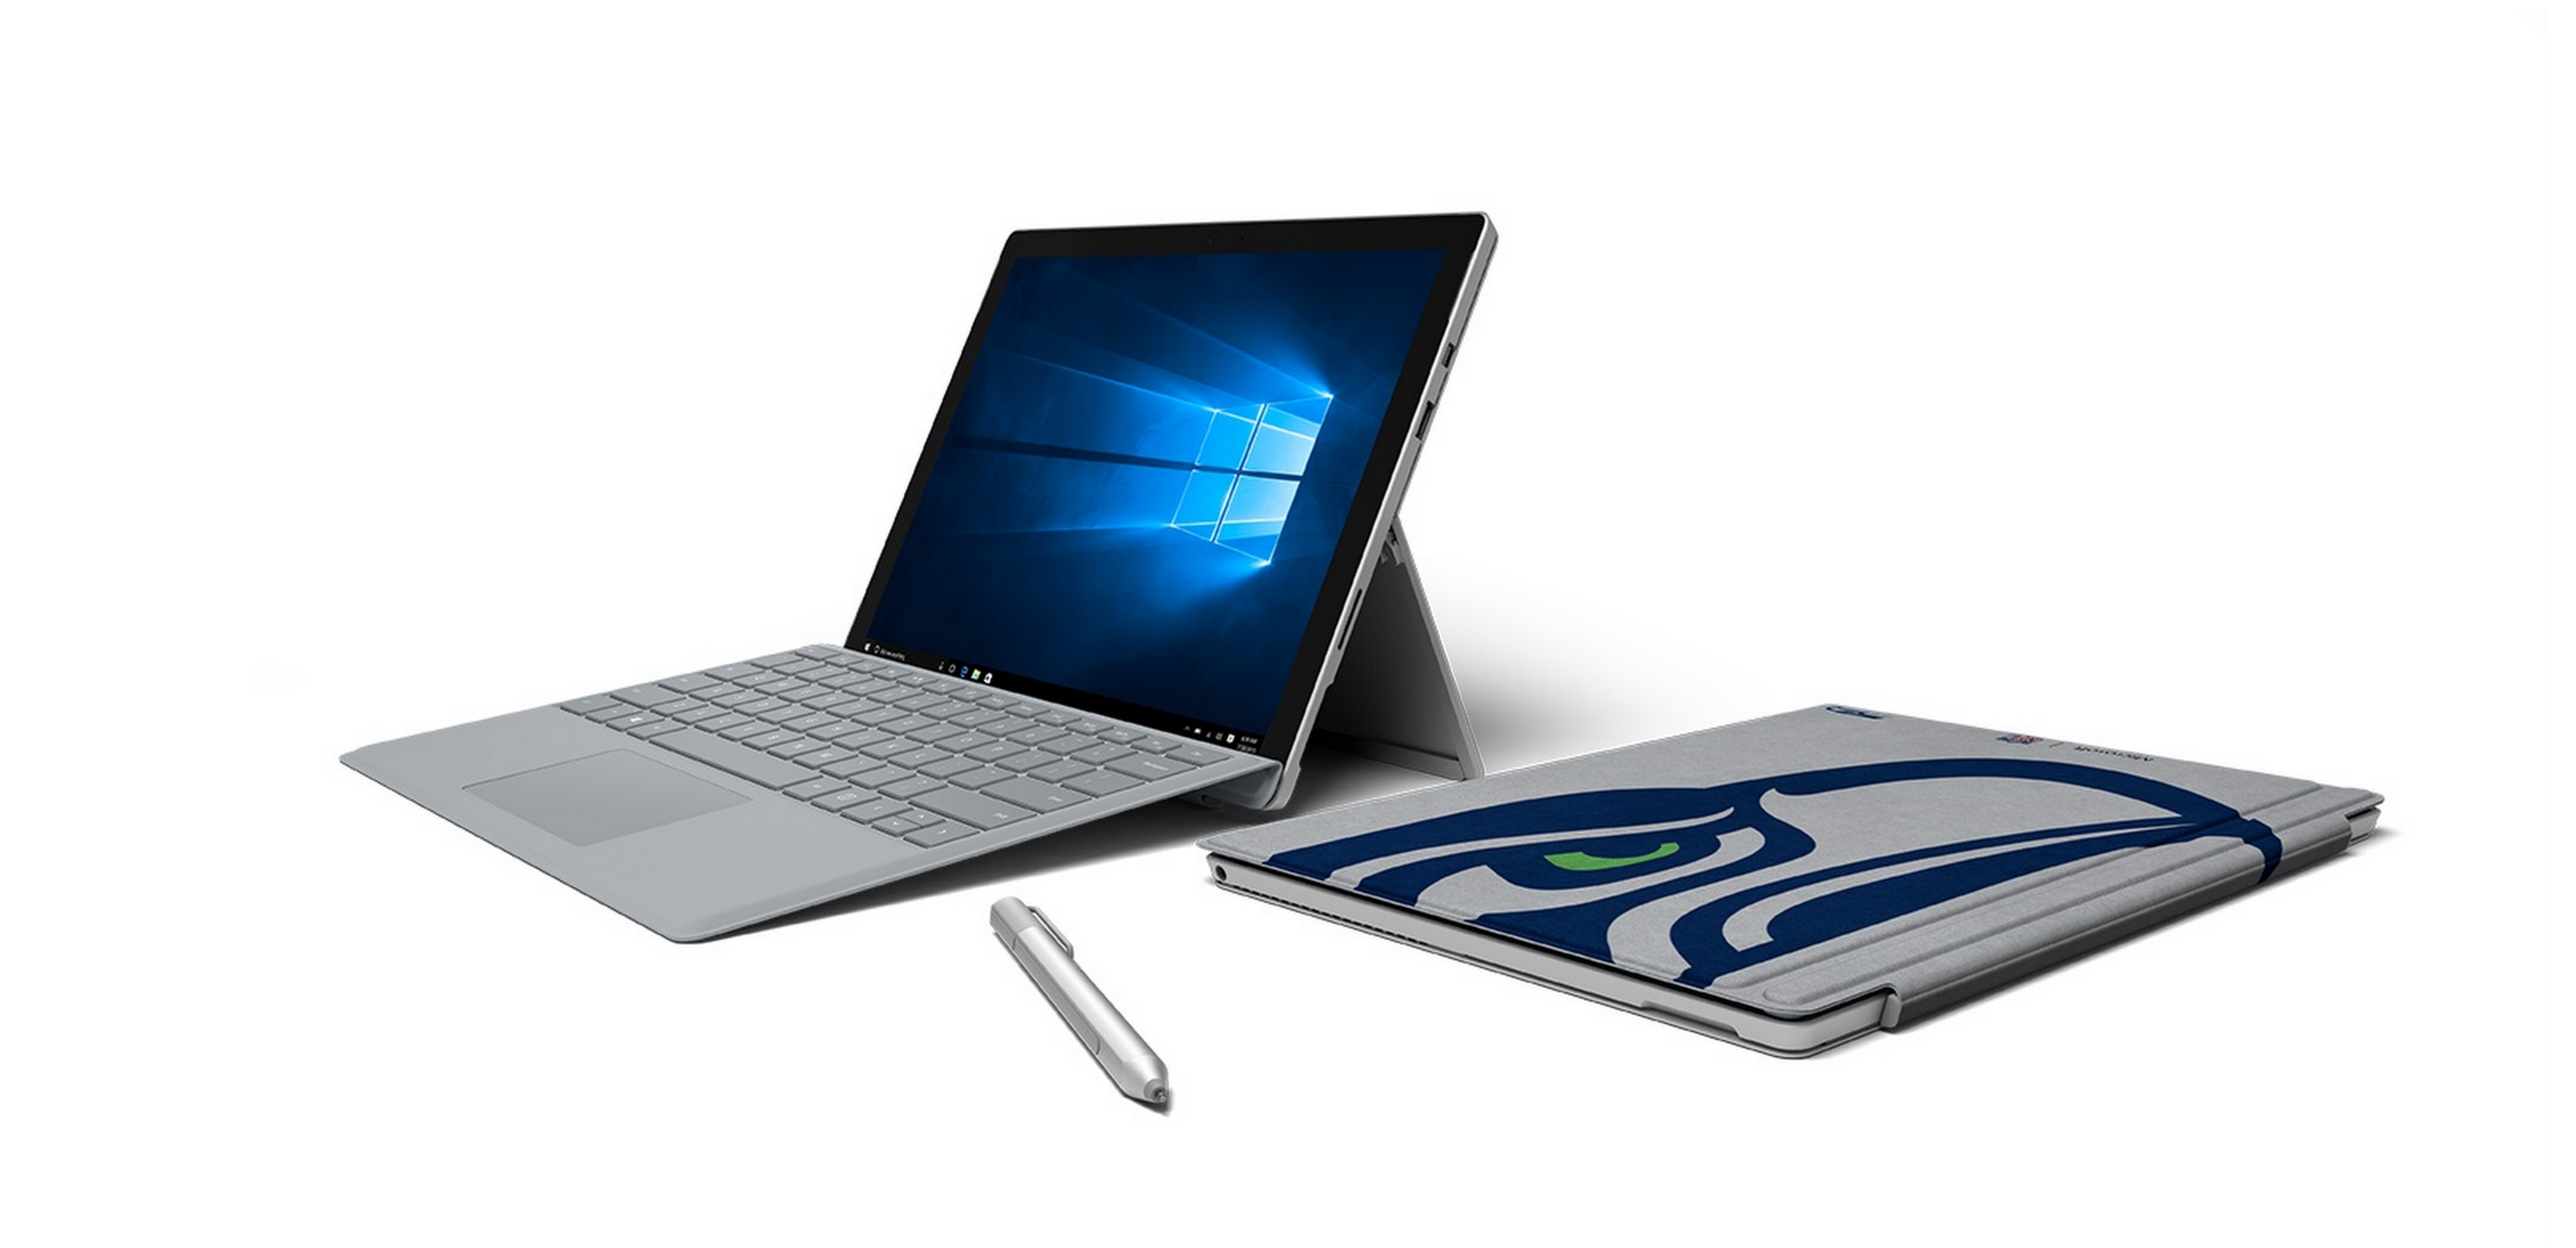 Microsoft Surface Pro 4 Seattle Seahawks Type Cover